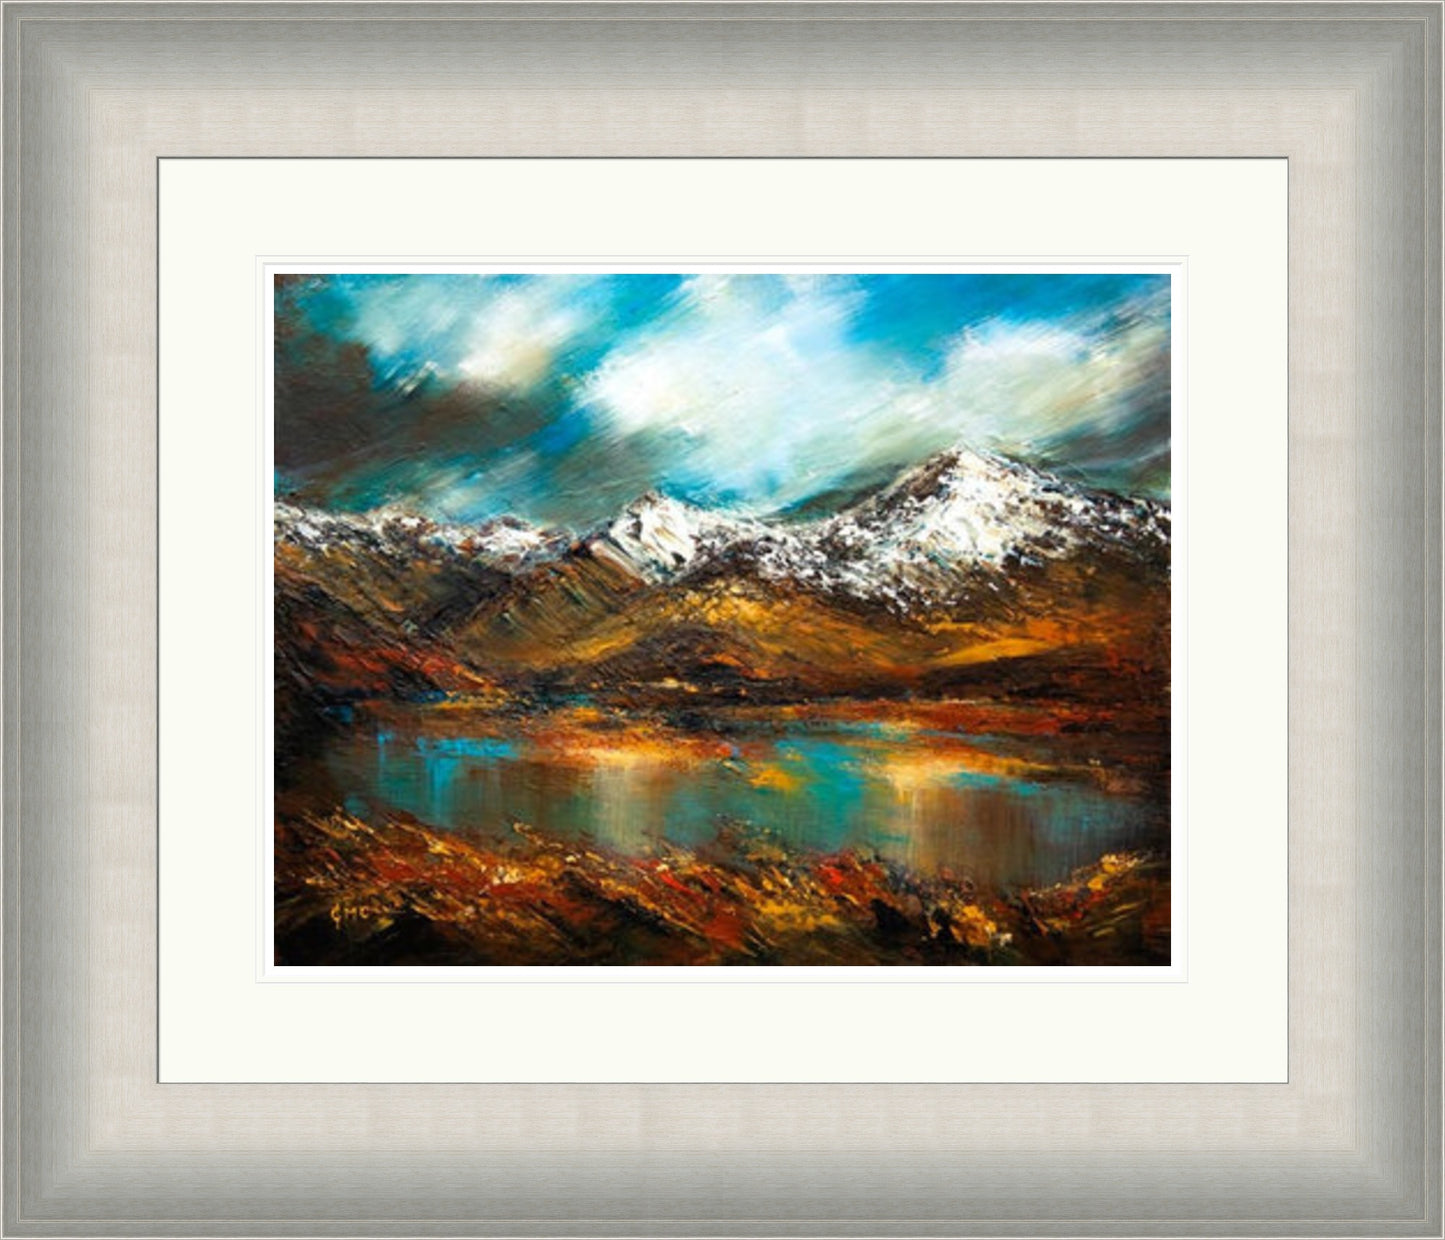 Storm Approaches Rannoch by Grace Cameron